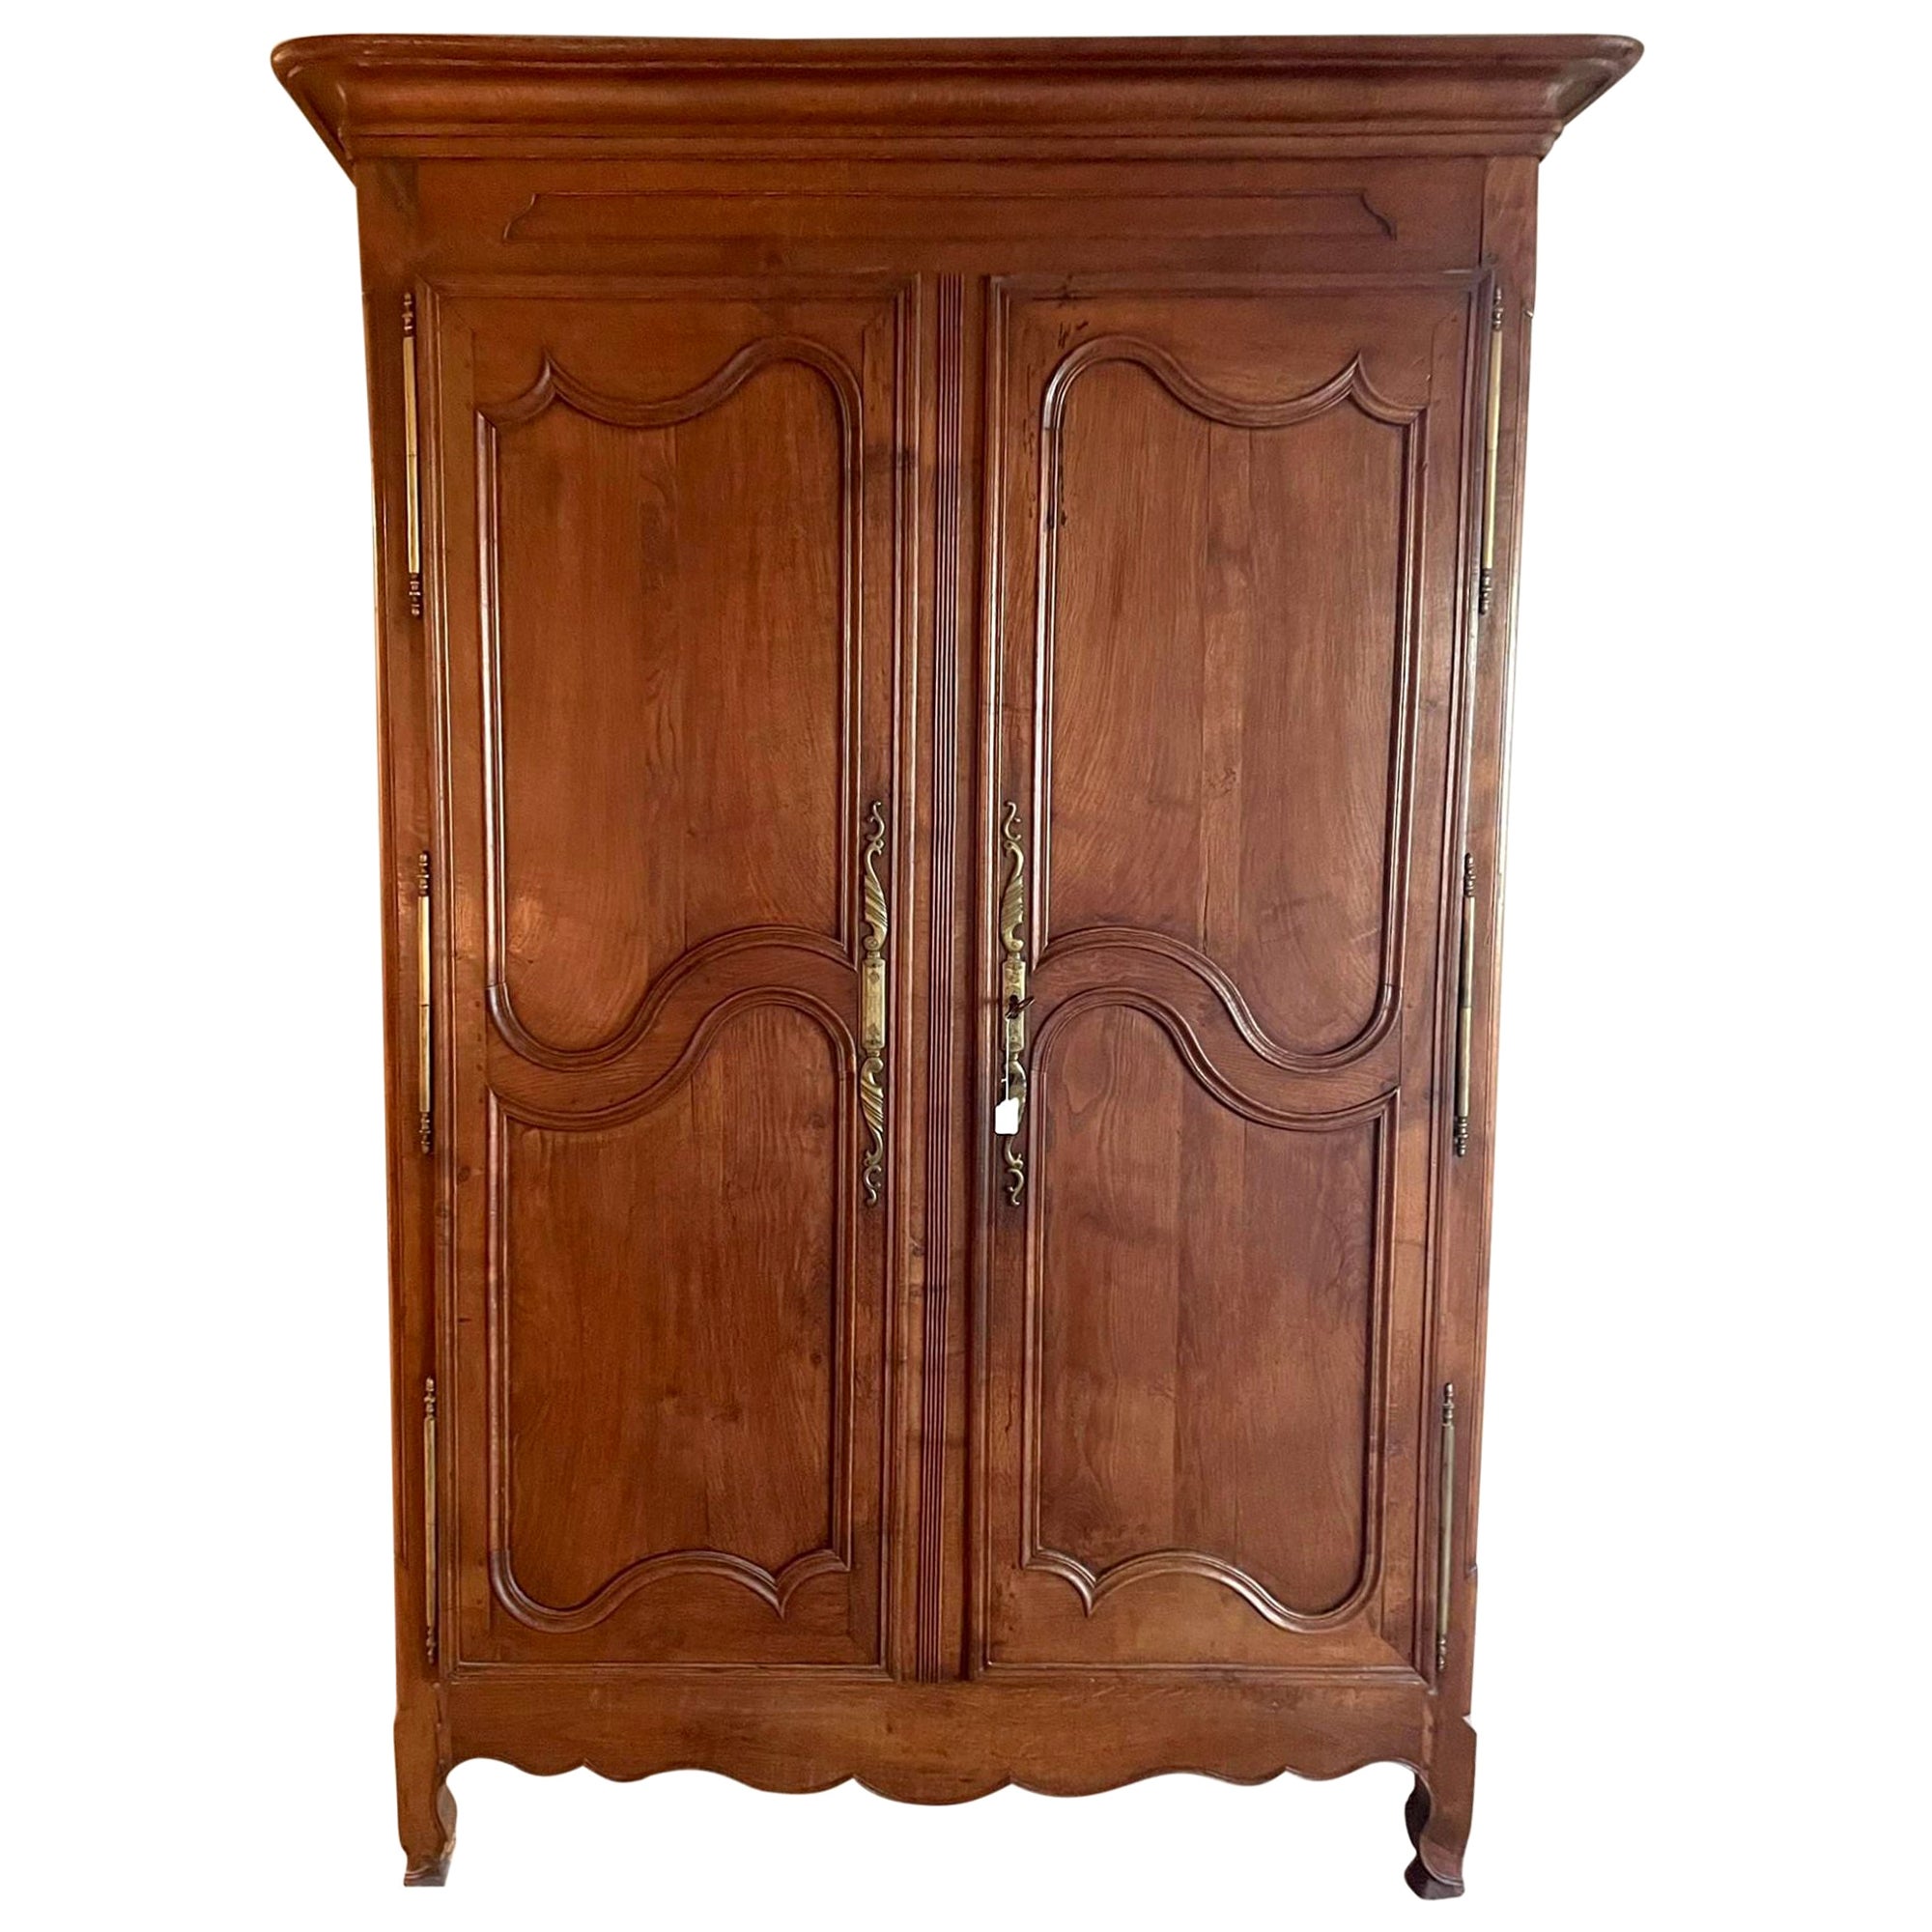 18th Century French Country Armoire Linen Press Wardrobe Cabinet